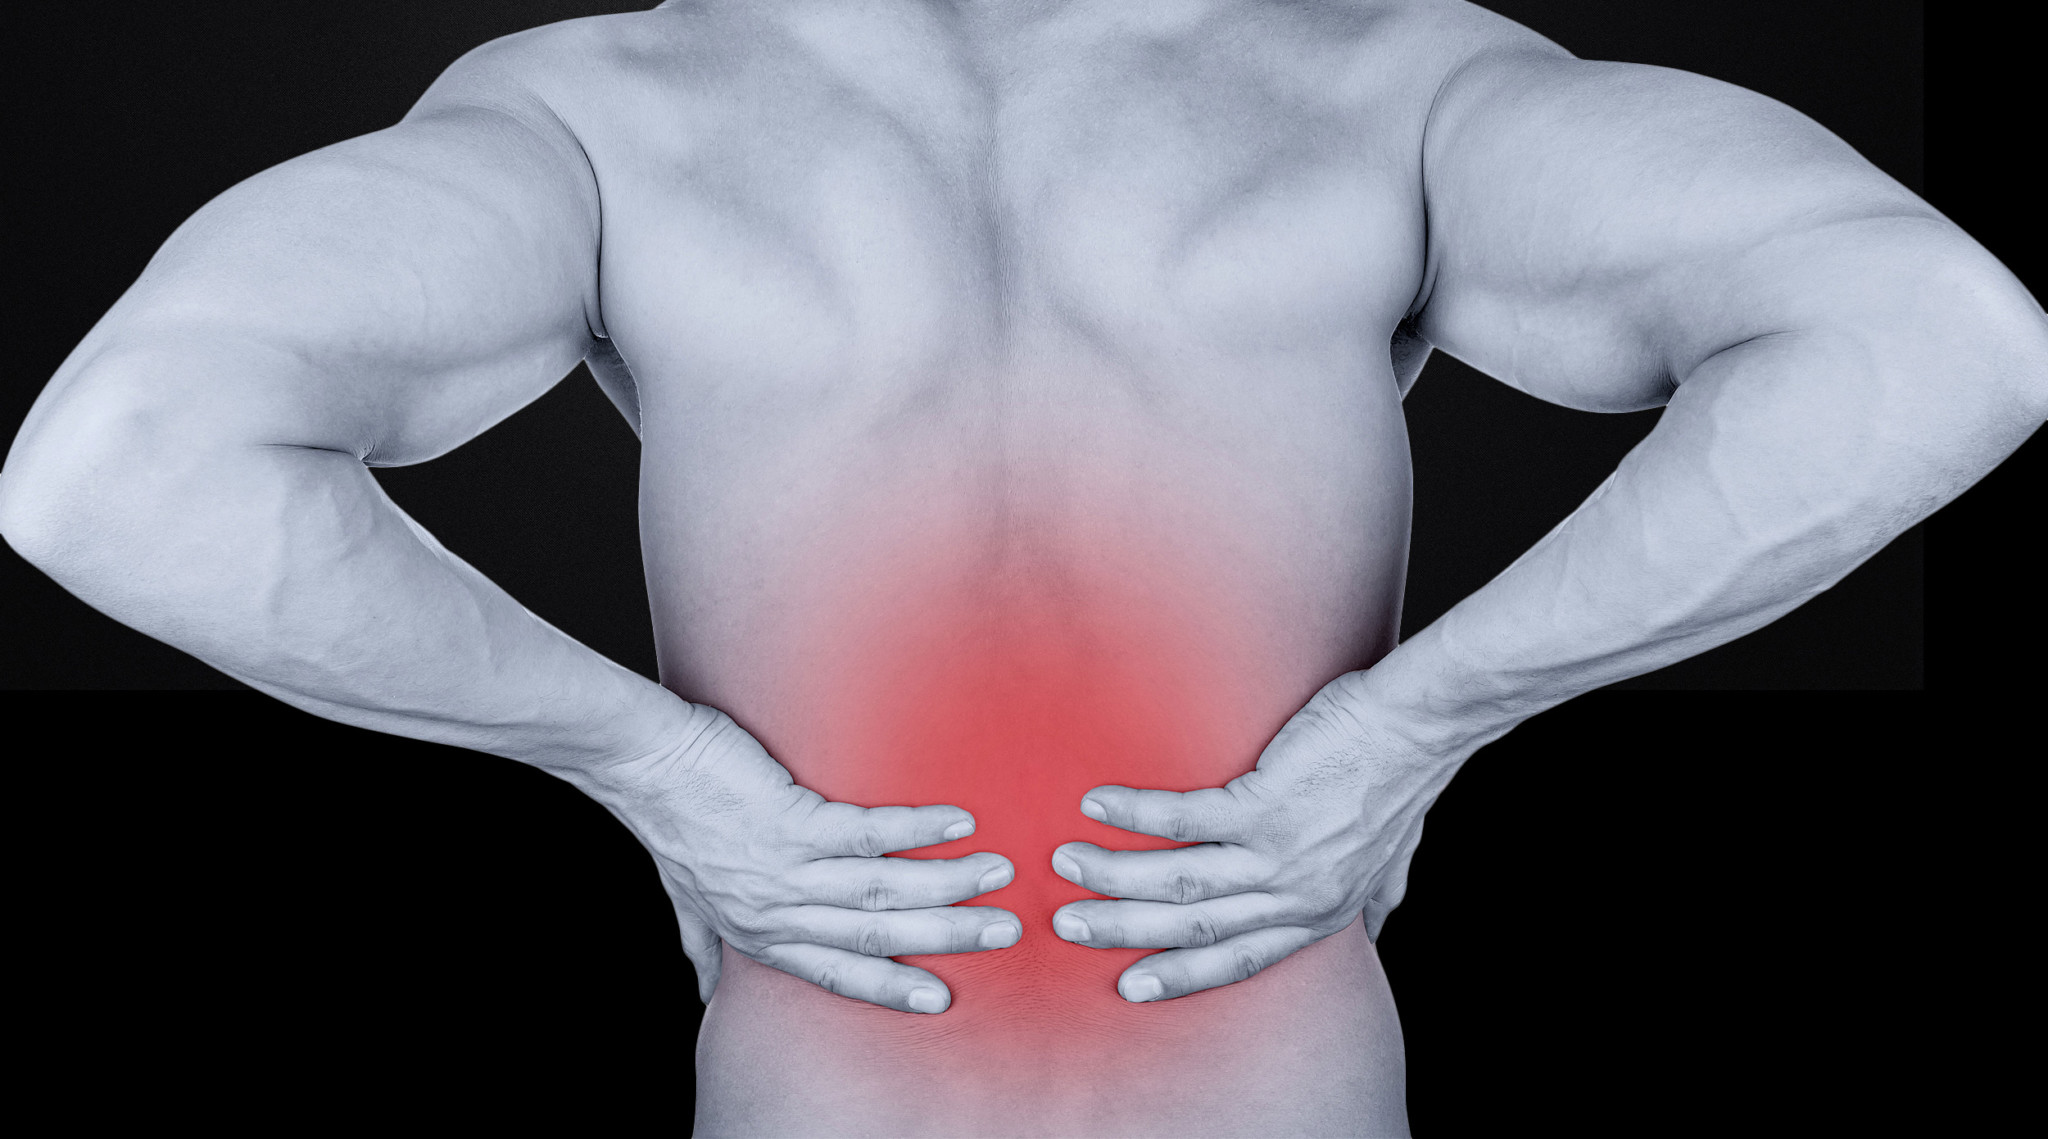 How to Fix lower back Pain. Reducing inflammation. How to relieve back Pain at work | back Pain Relief. No Pain background.